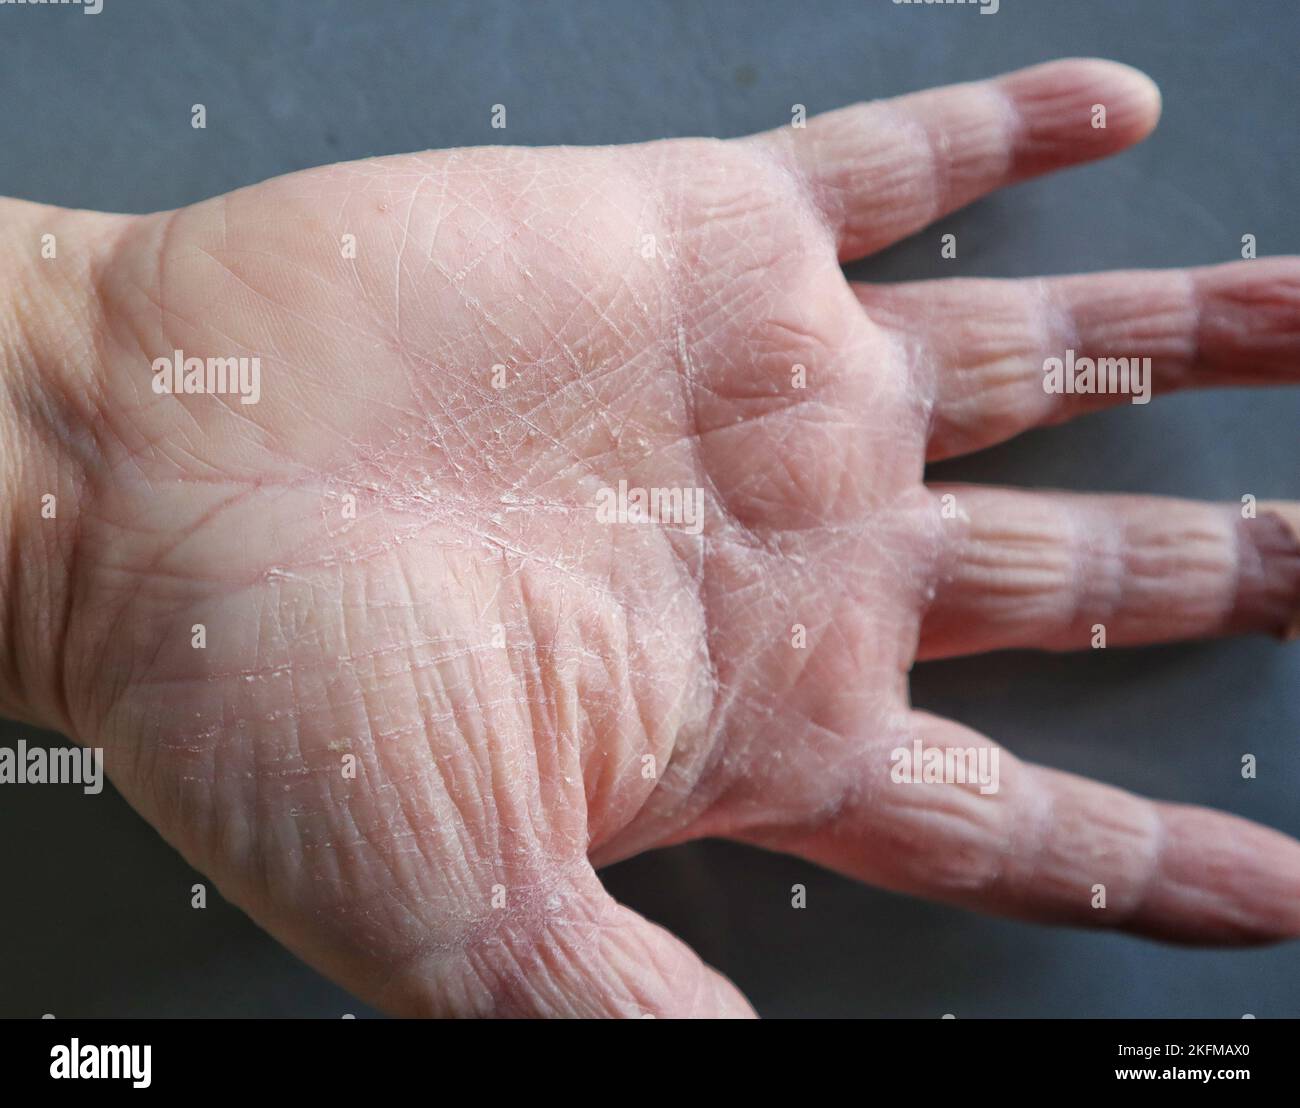 dry skin on hands Stock Photo